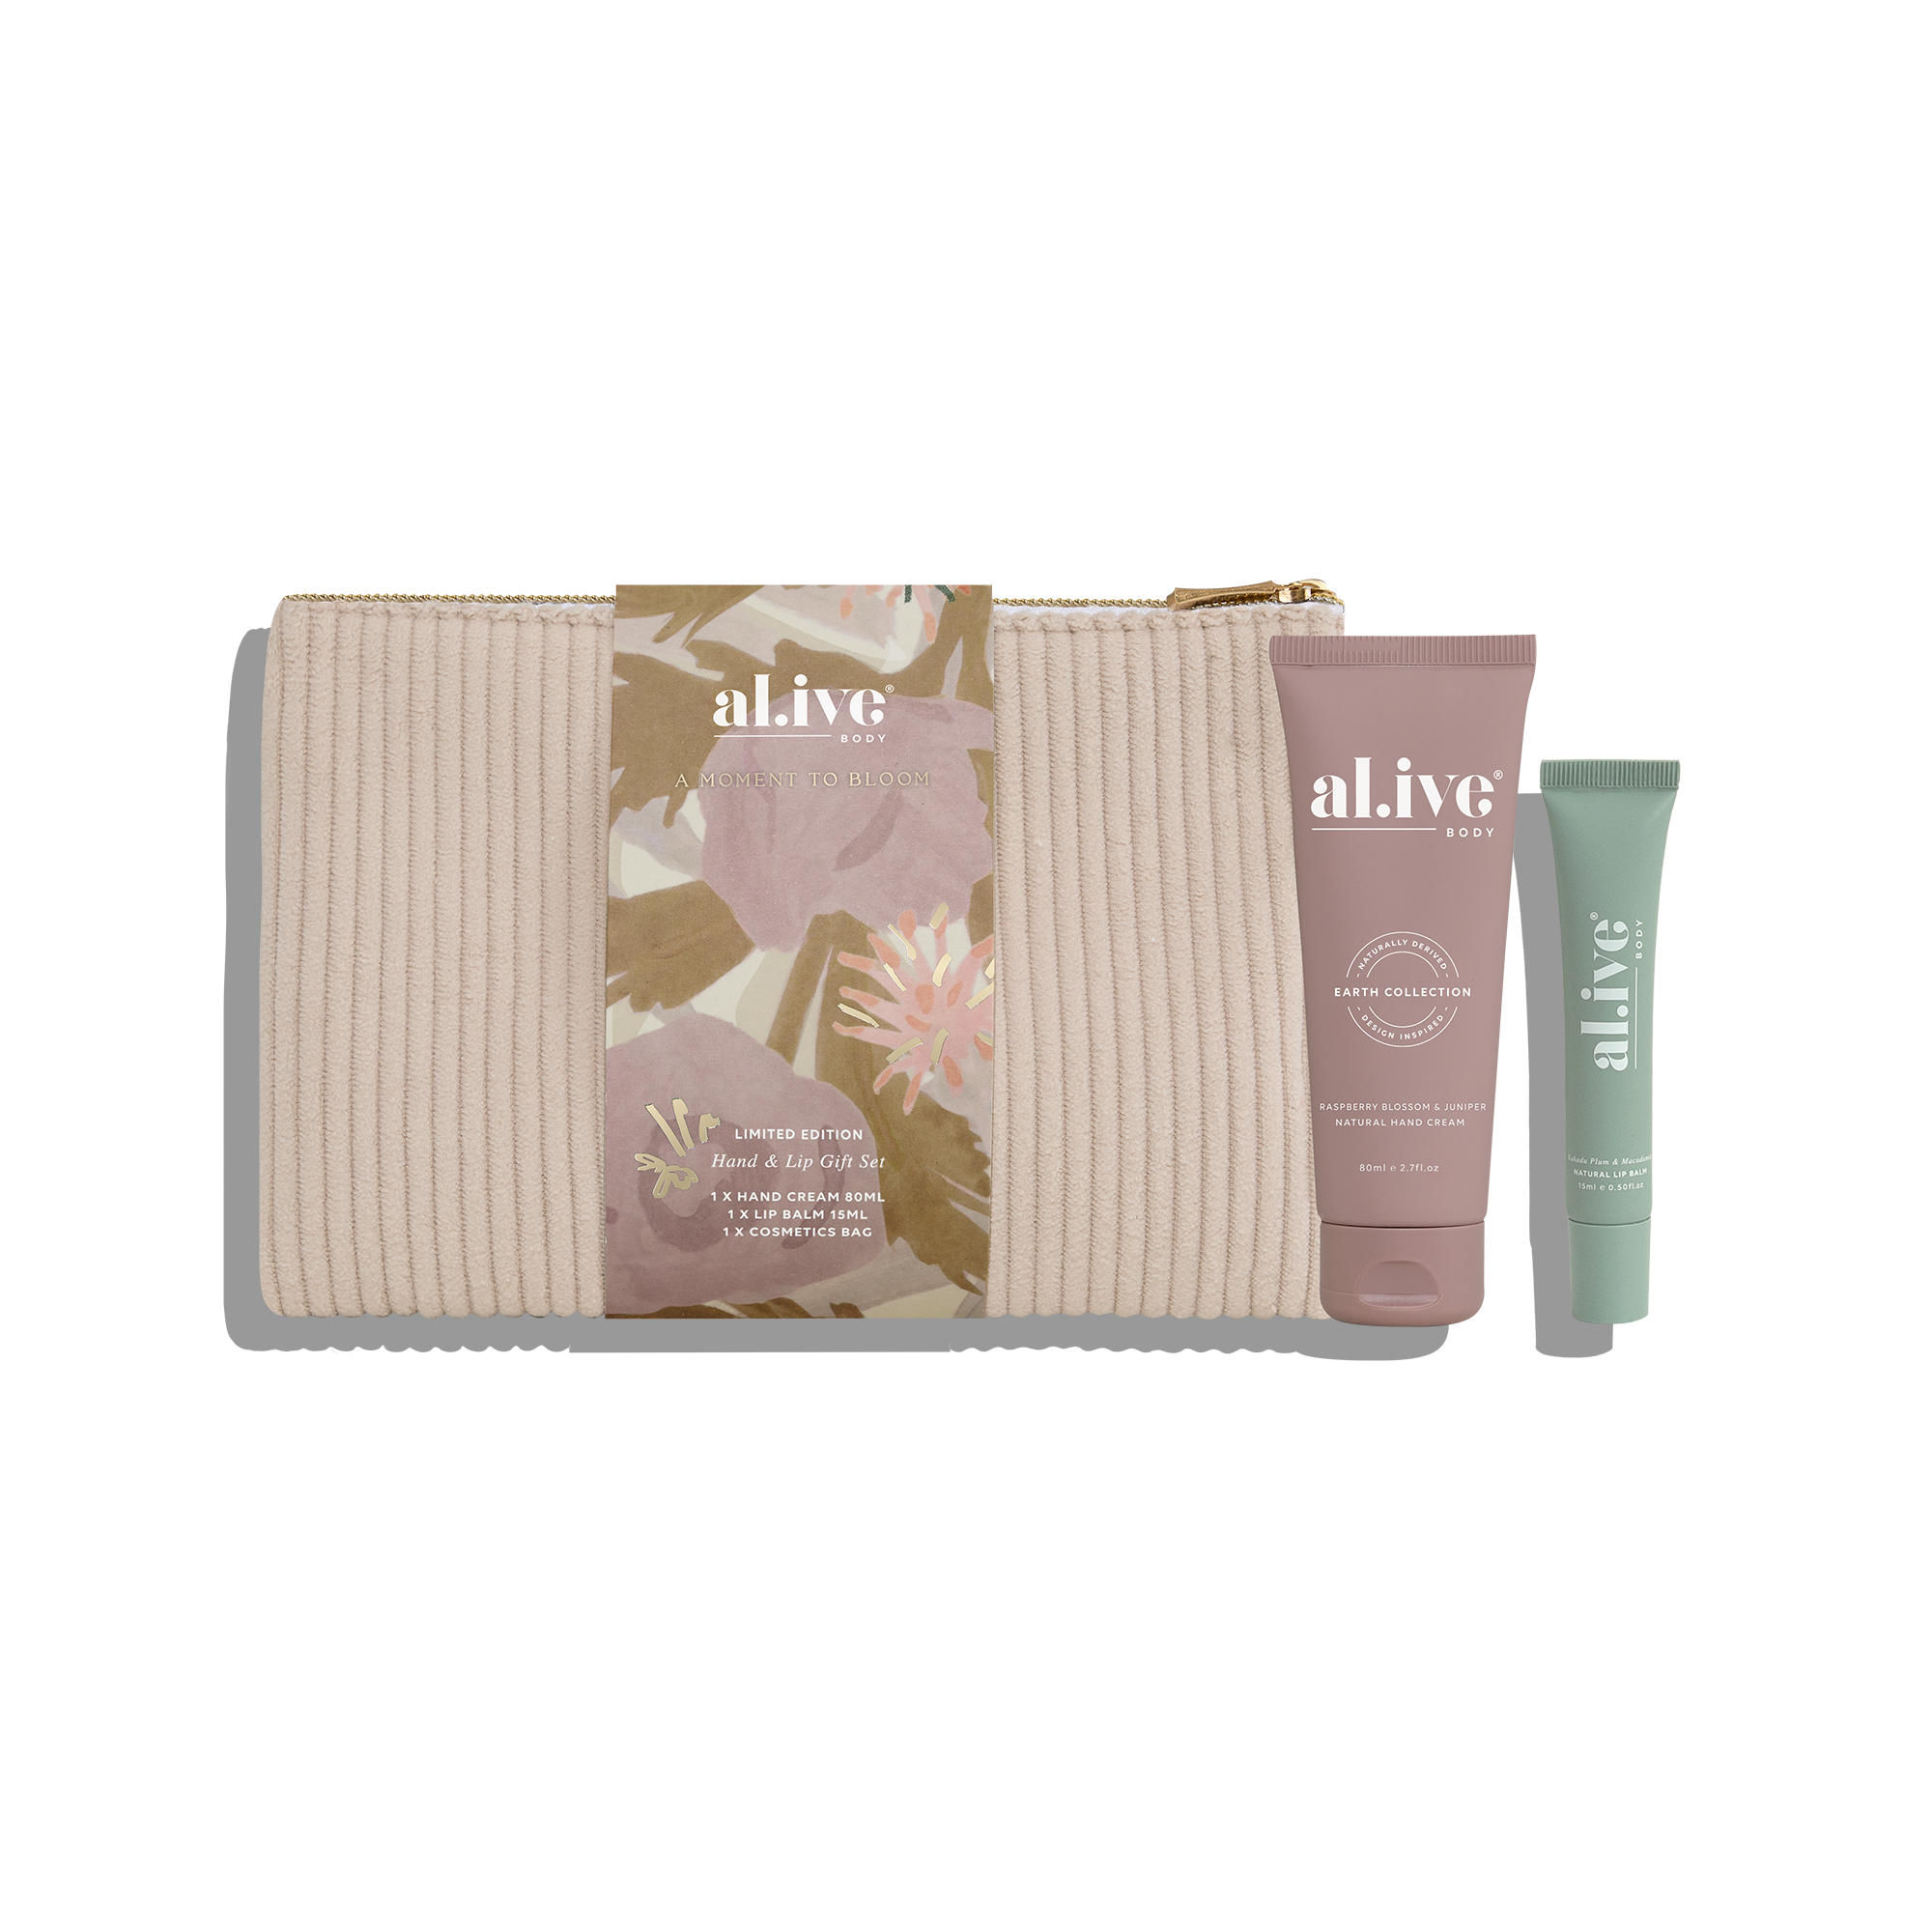 Alive Hand & Lip Gift Set - A Moment to Bloom